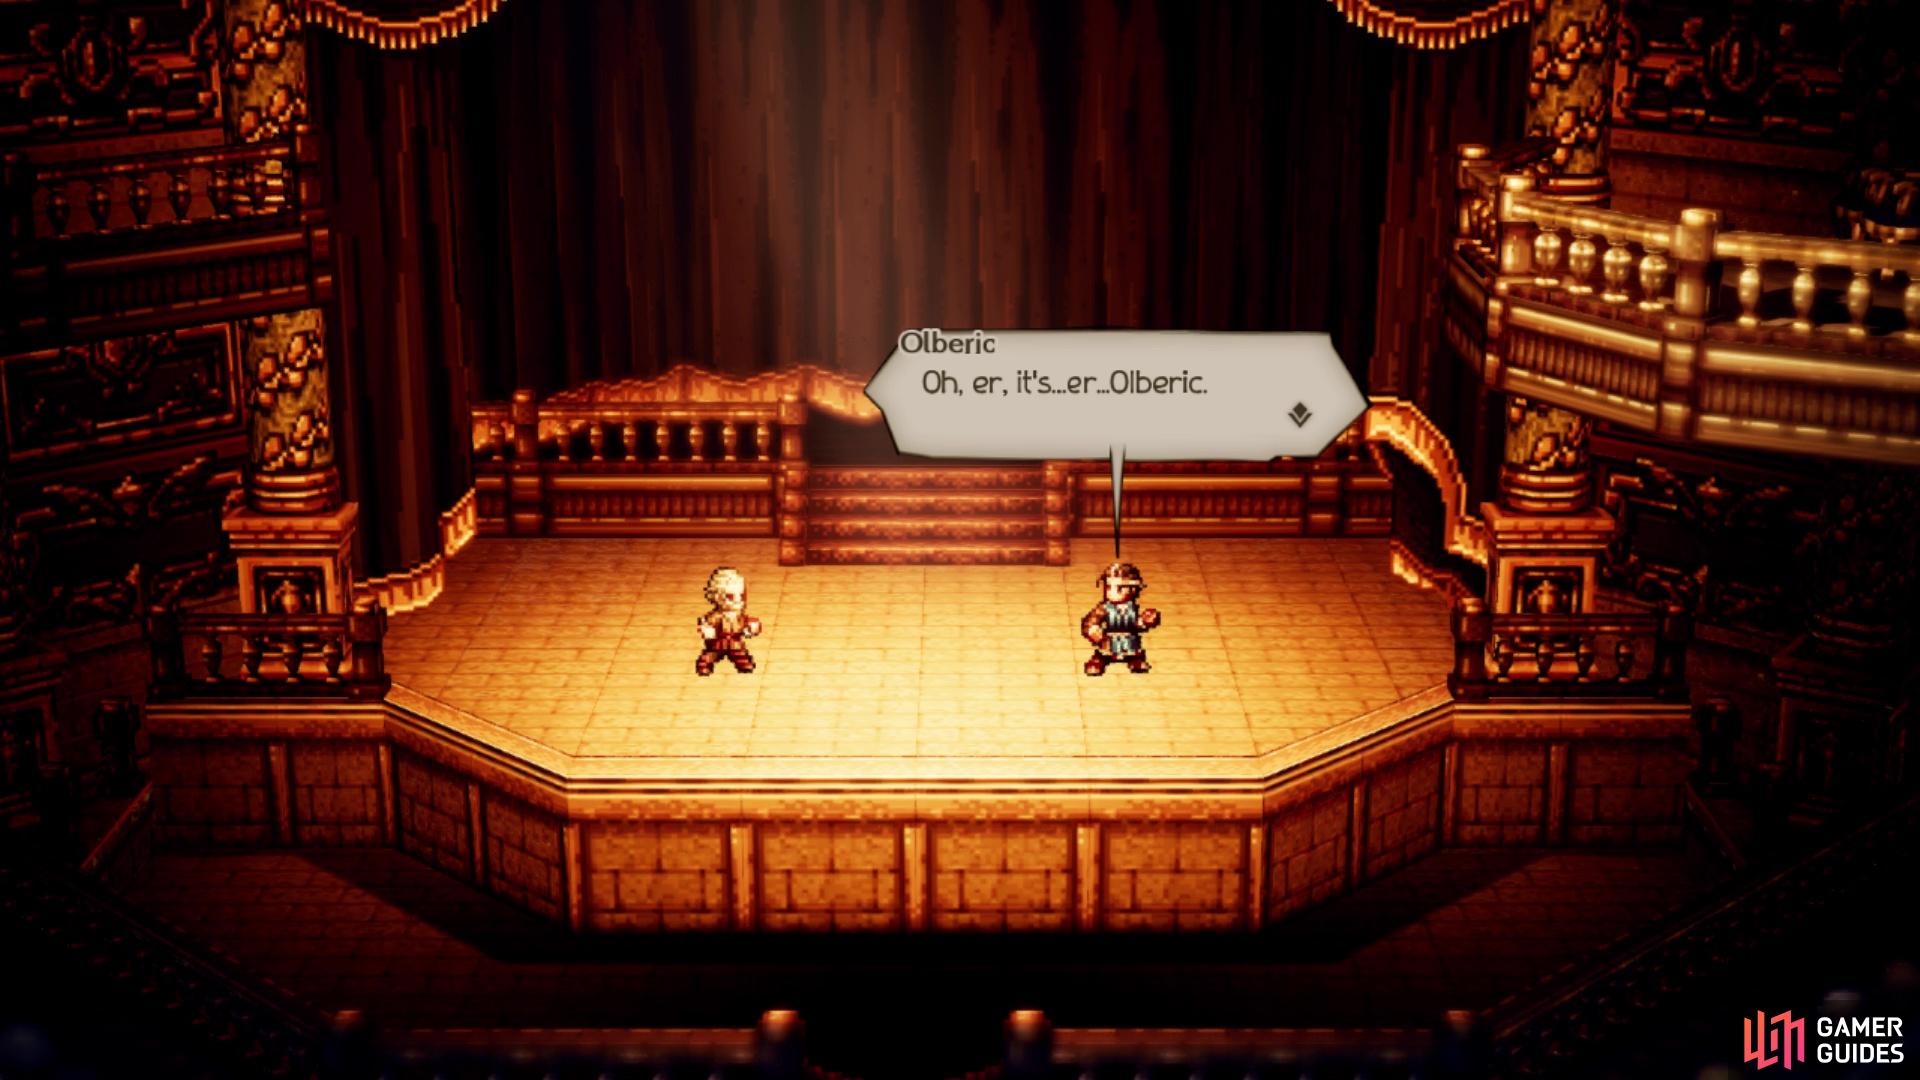 You can witness Olberic's acting skills if you use him in this quest